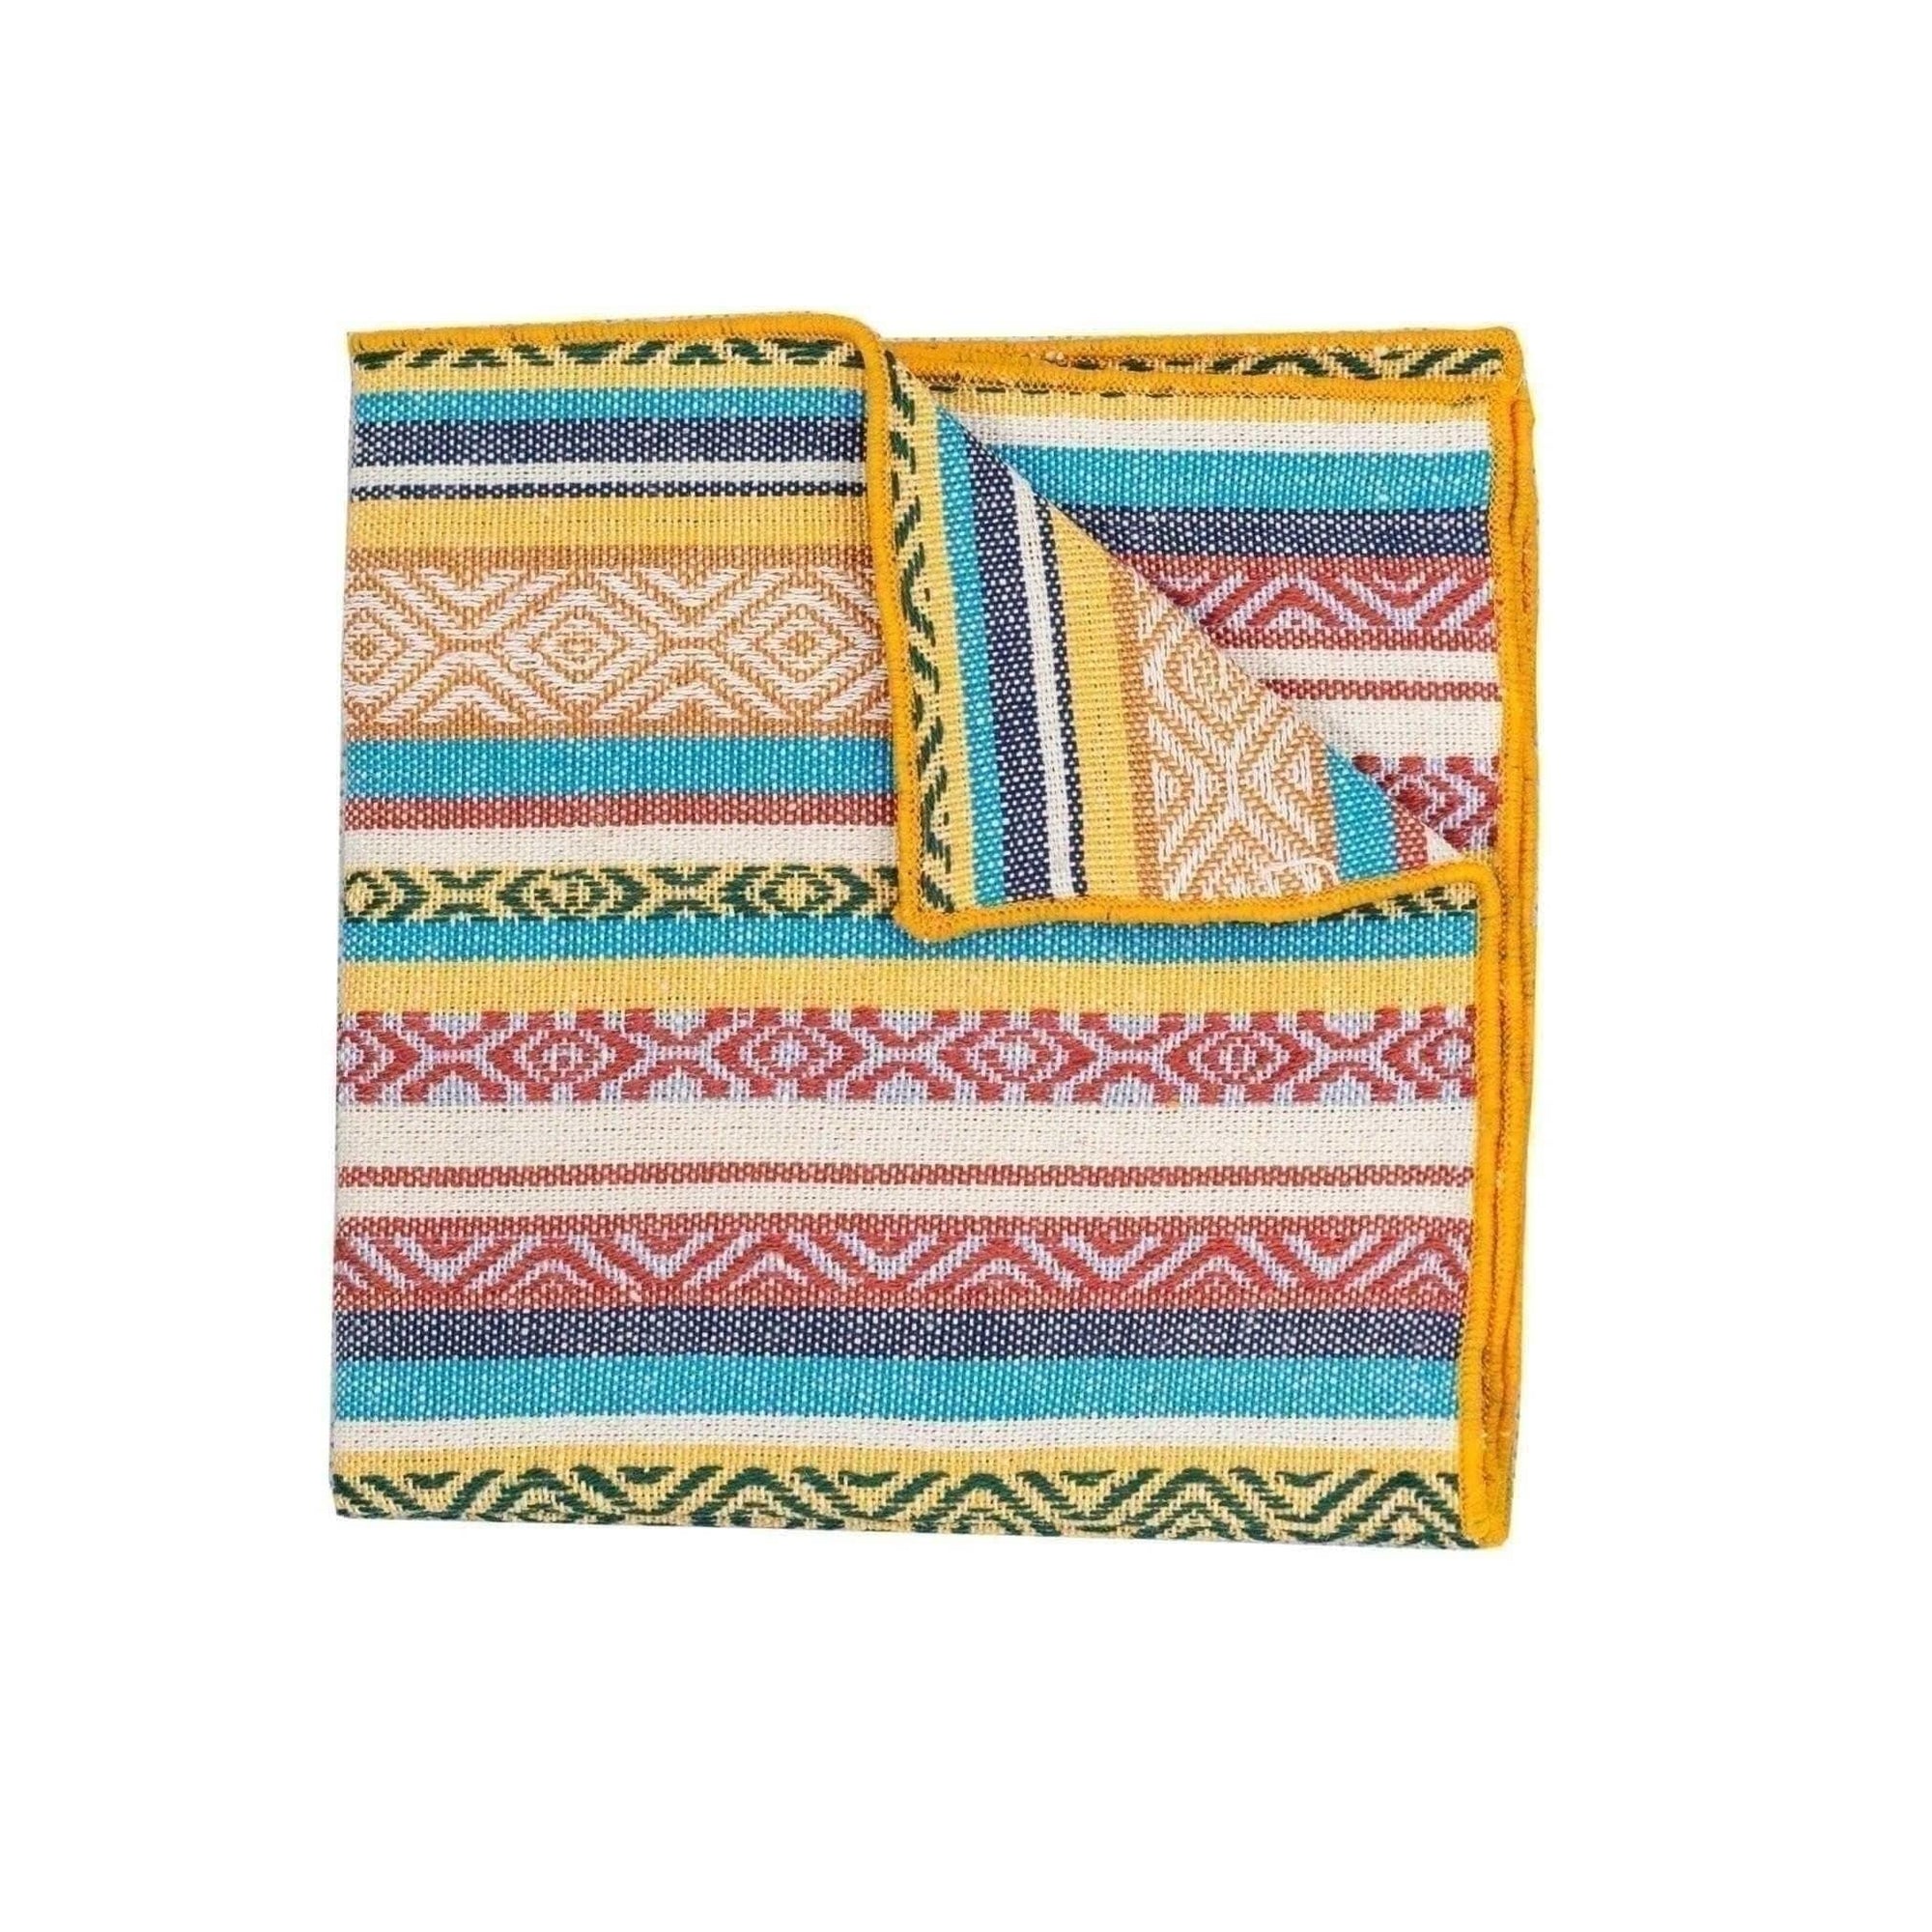 Aztec Print Pocket Square ARIZONA - MYTIESHOP Mytieshop Aztec print pocket square Material: CottonItem Length: 23 cm ( 9 inches)Item Width : 22 cm (8.6 inches) Multicolor Aztec floral pocket square Great for: Weddings Groom Groomsmen Wedding Shoots Formal Prom Fancy Parties Gifts and presents